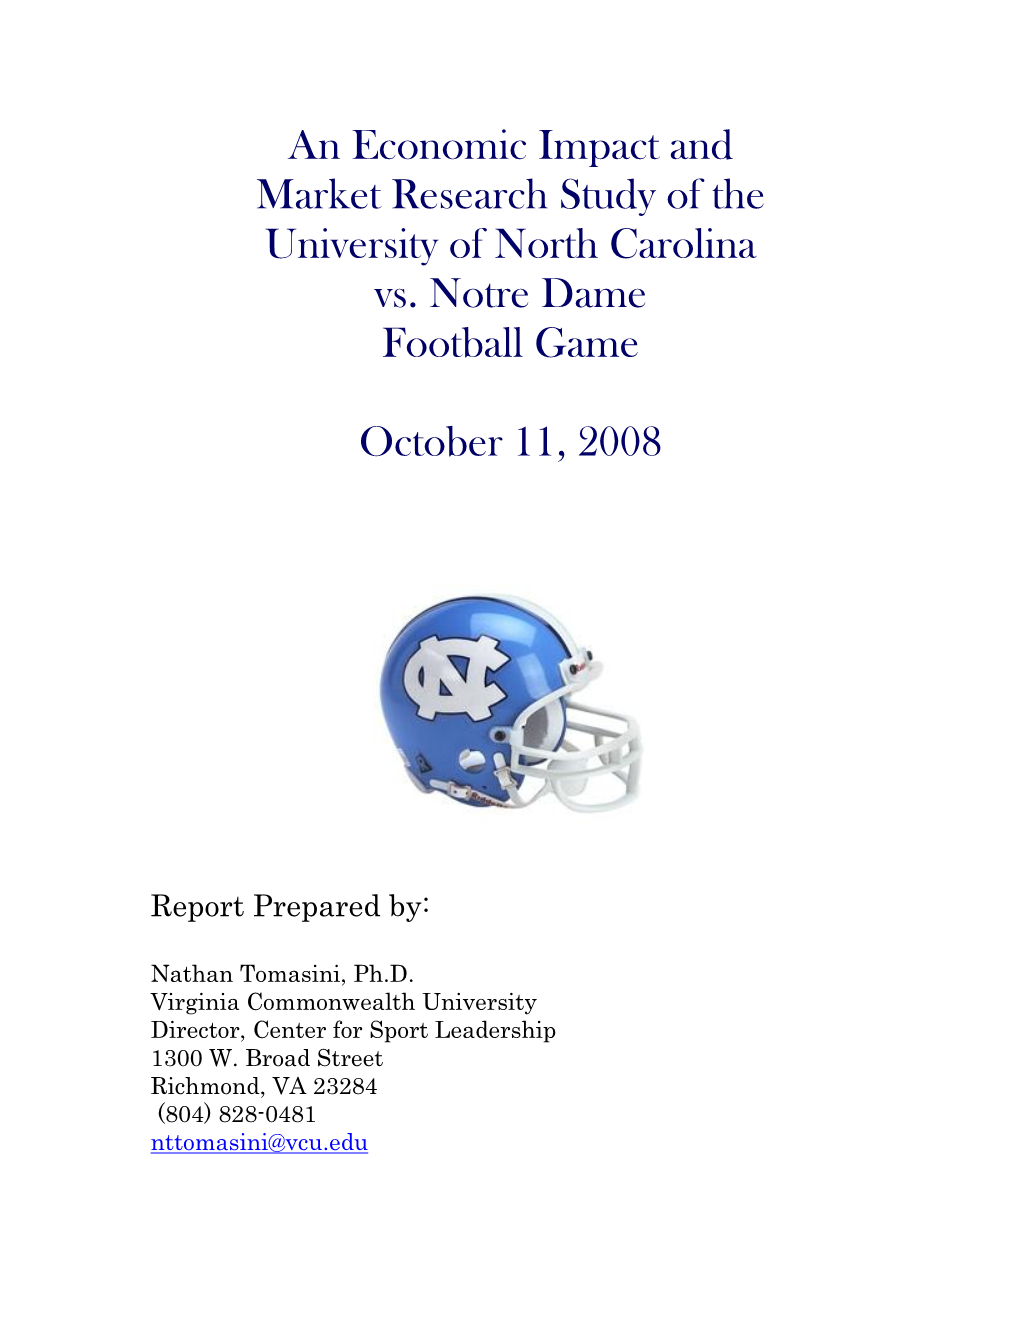 An Economic Impact and Market Research Study of the University of North Carolina Vs